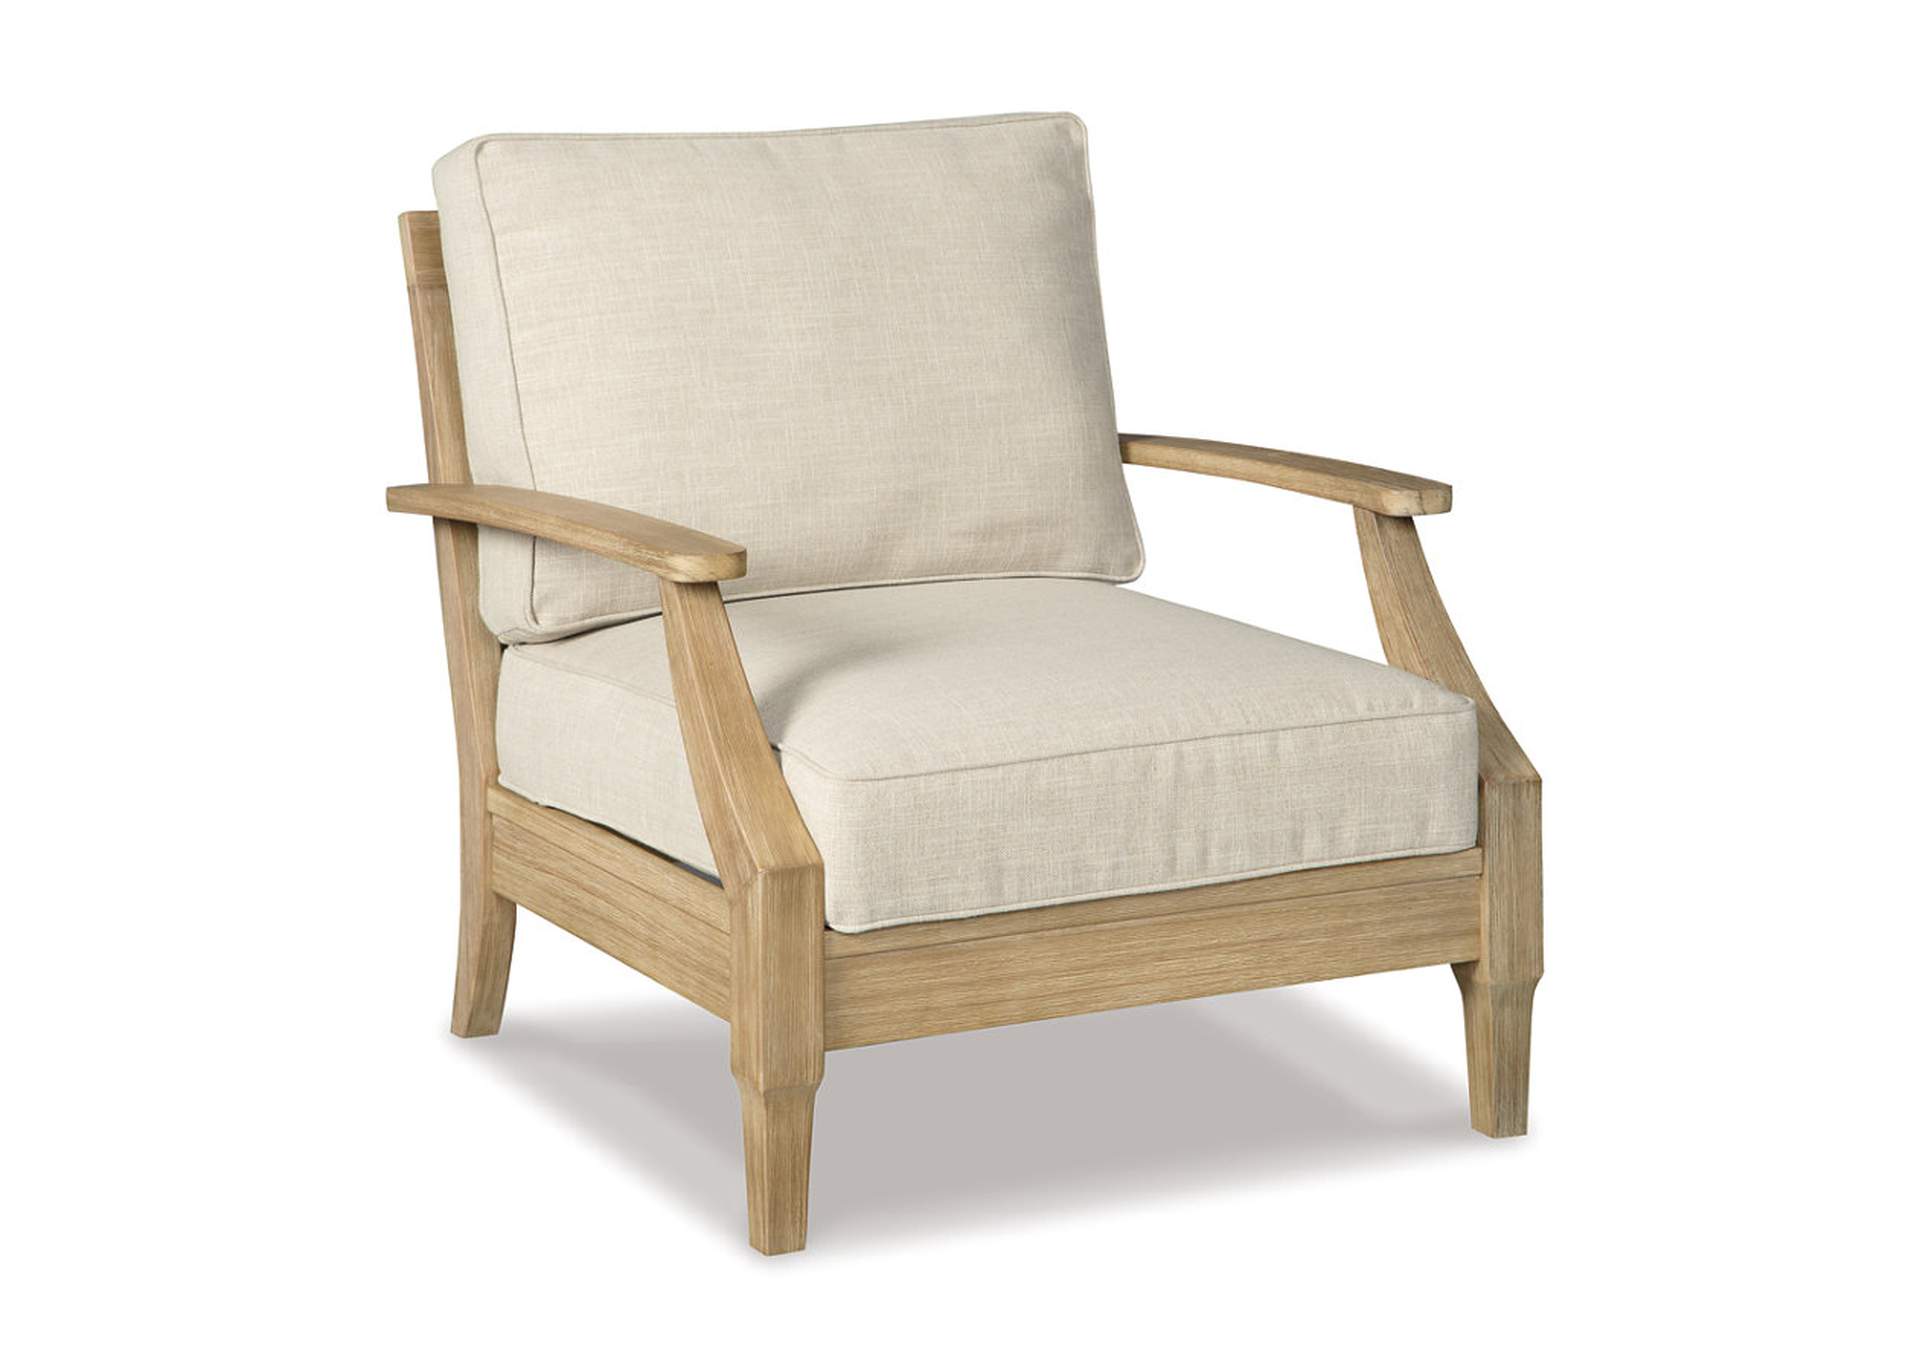 Clare View Lounge Chair with Cushion,Outdoor By Ashley